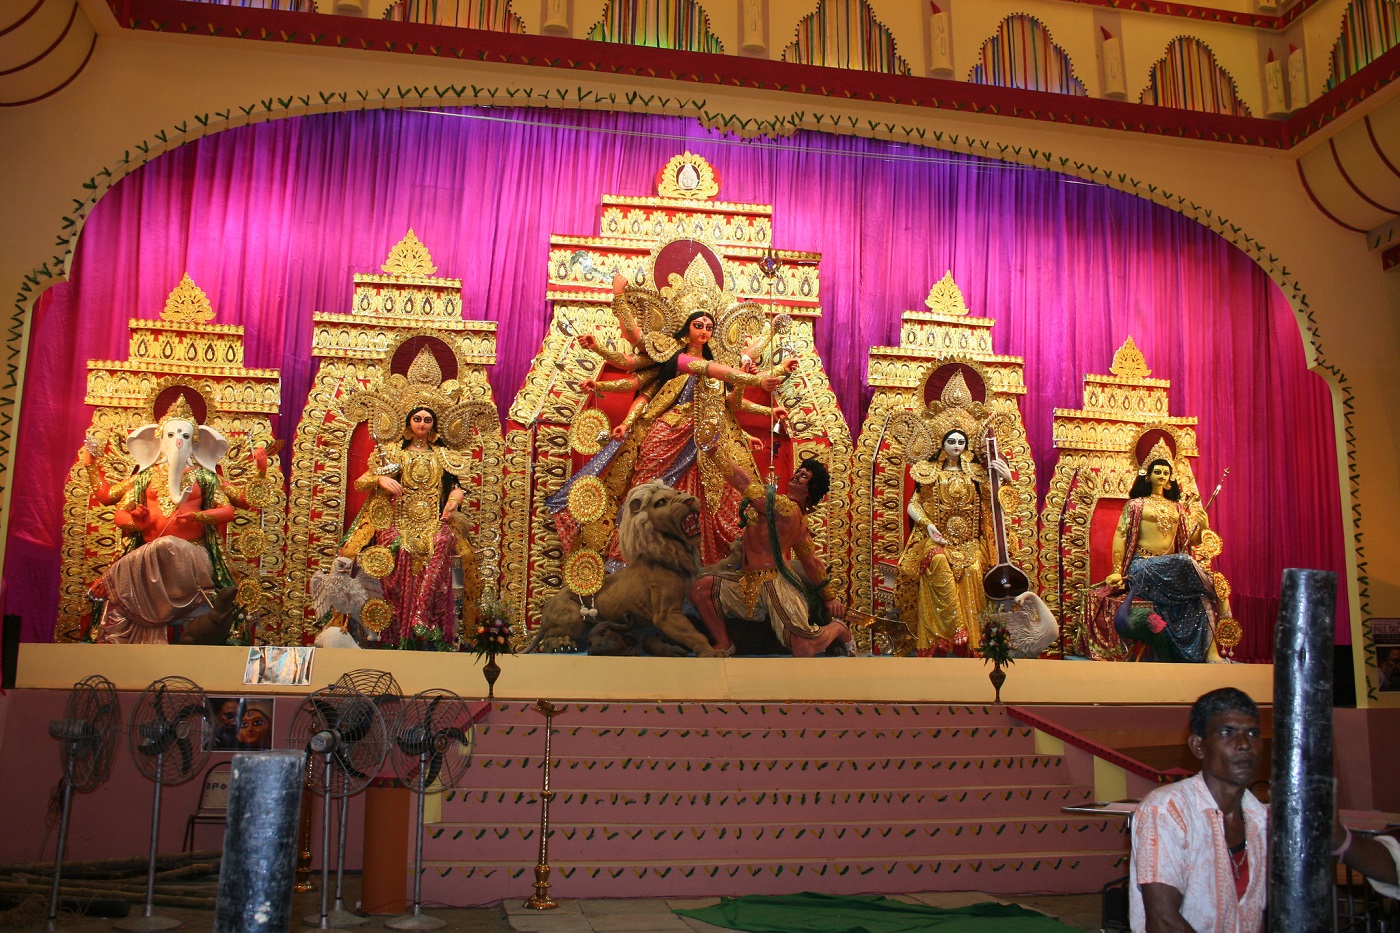 List of Famous Durga Puja Pandals in Kolkata with Address - 2020, 2021‌